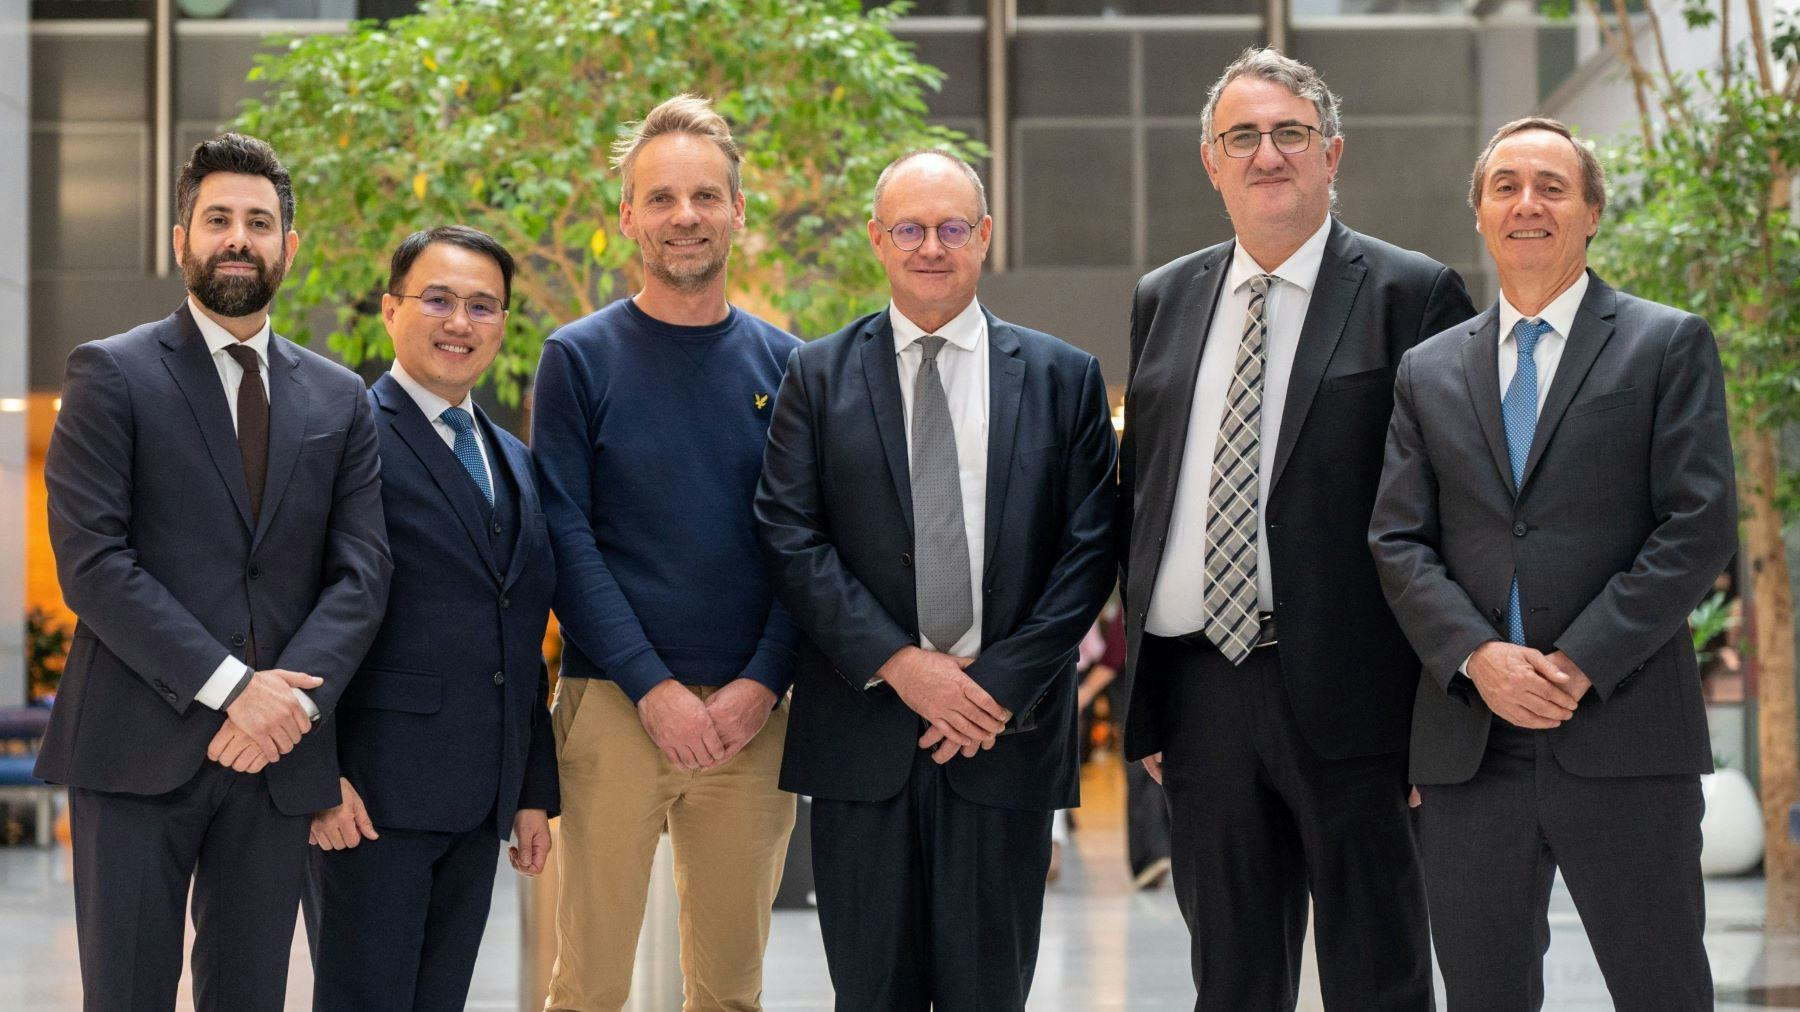 Newly appointed board members of CONEBI include, from Left to Right: CONEBI General Manager, Manuel Marsilio, Board Members Mr. Ben Kao, Mr. Remco Tekstra, Mr. Didier Morelle, Mr. Bayram Akgul and Mr. Pedro Araújo (Missing from the photo are CONEBI President Erhard Büchel and Board Member Mr. Massimo Panzeri) - Photo CONEBI